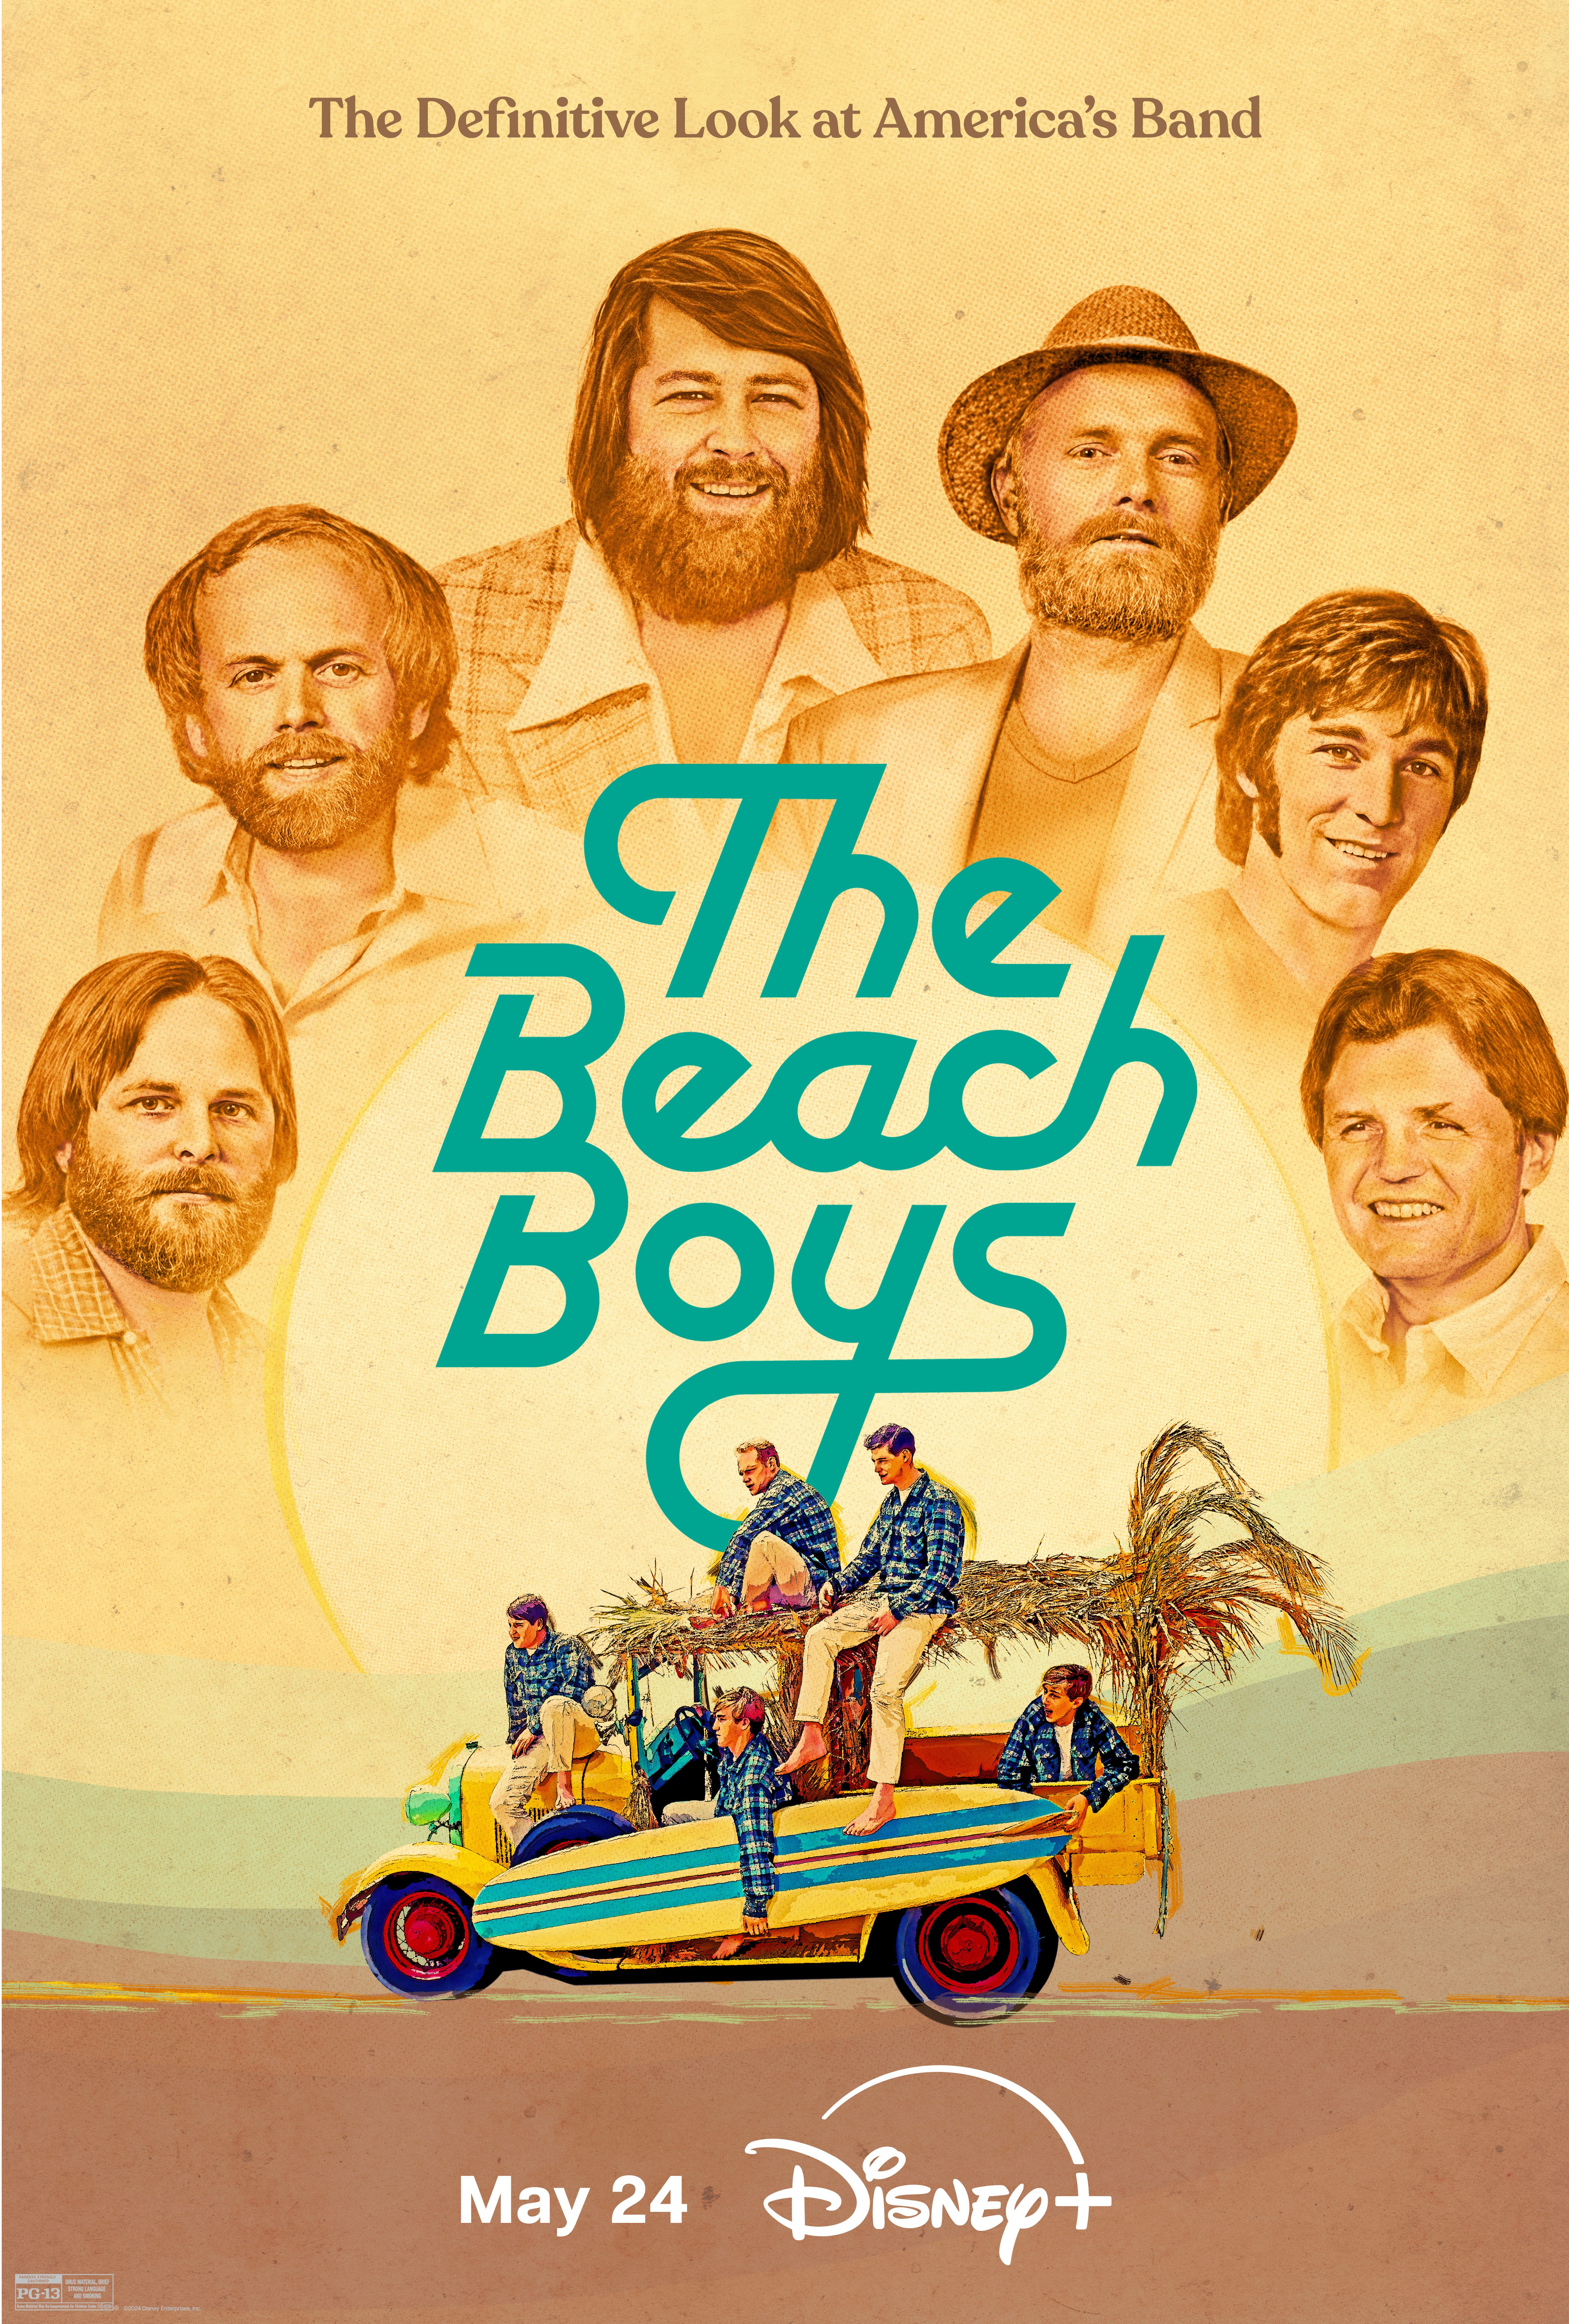 Poster for the documentary The Beach Boys featuring the band in a car heading for the beach and their faces around the sun